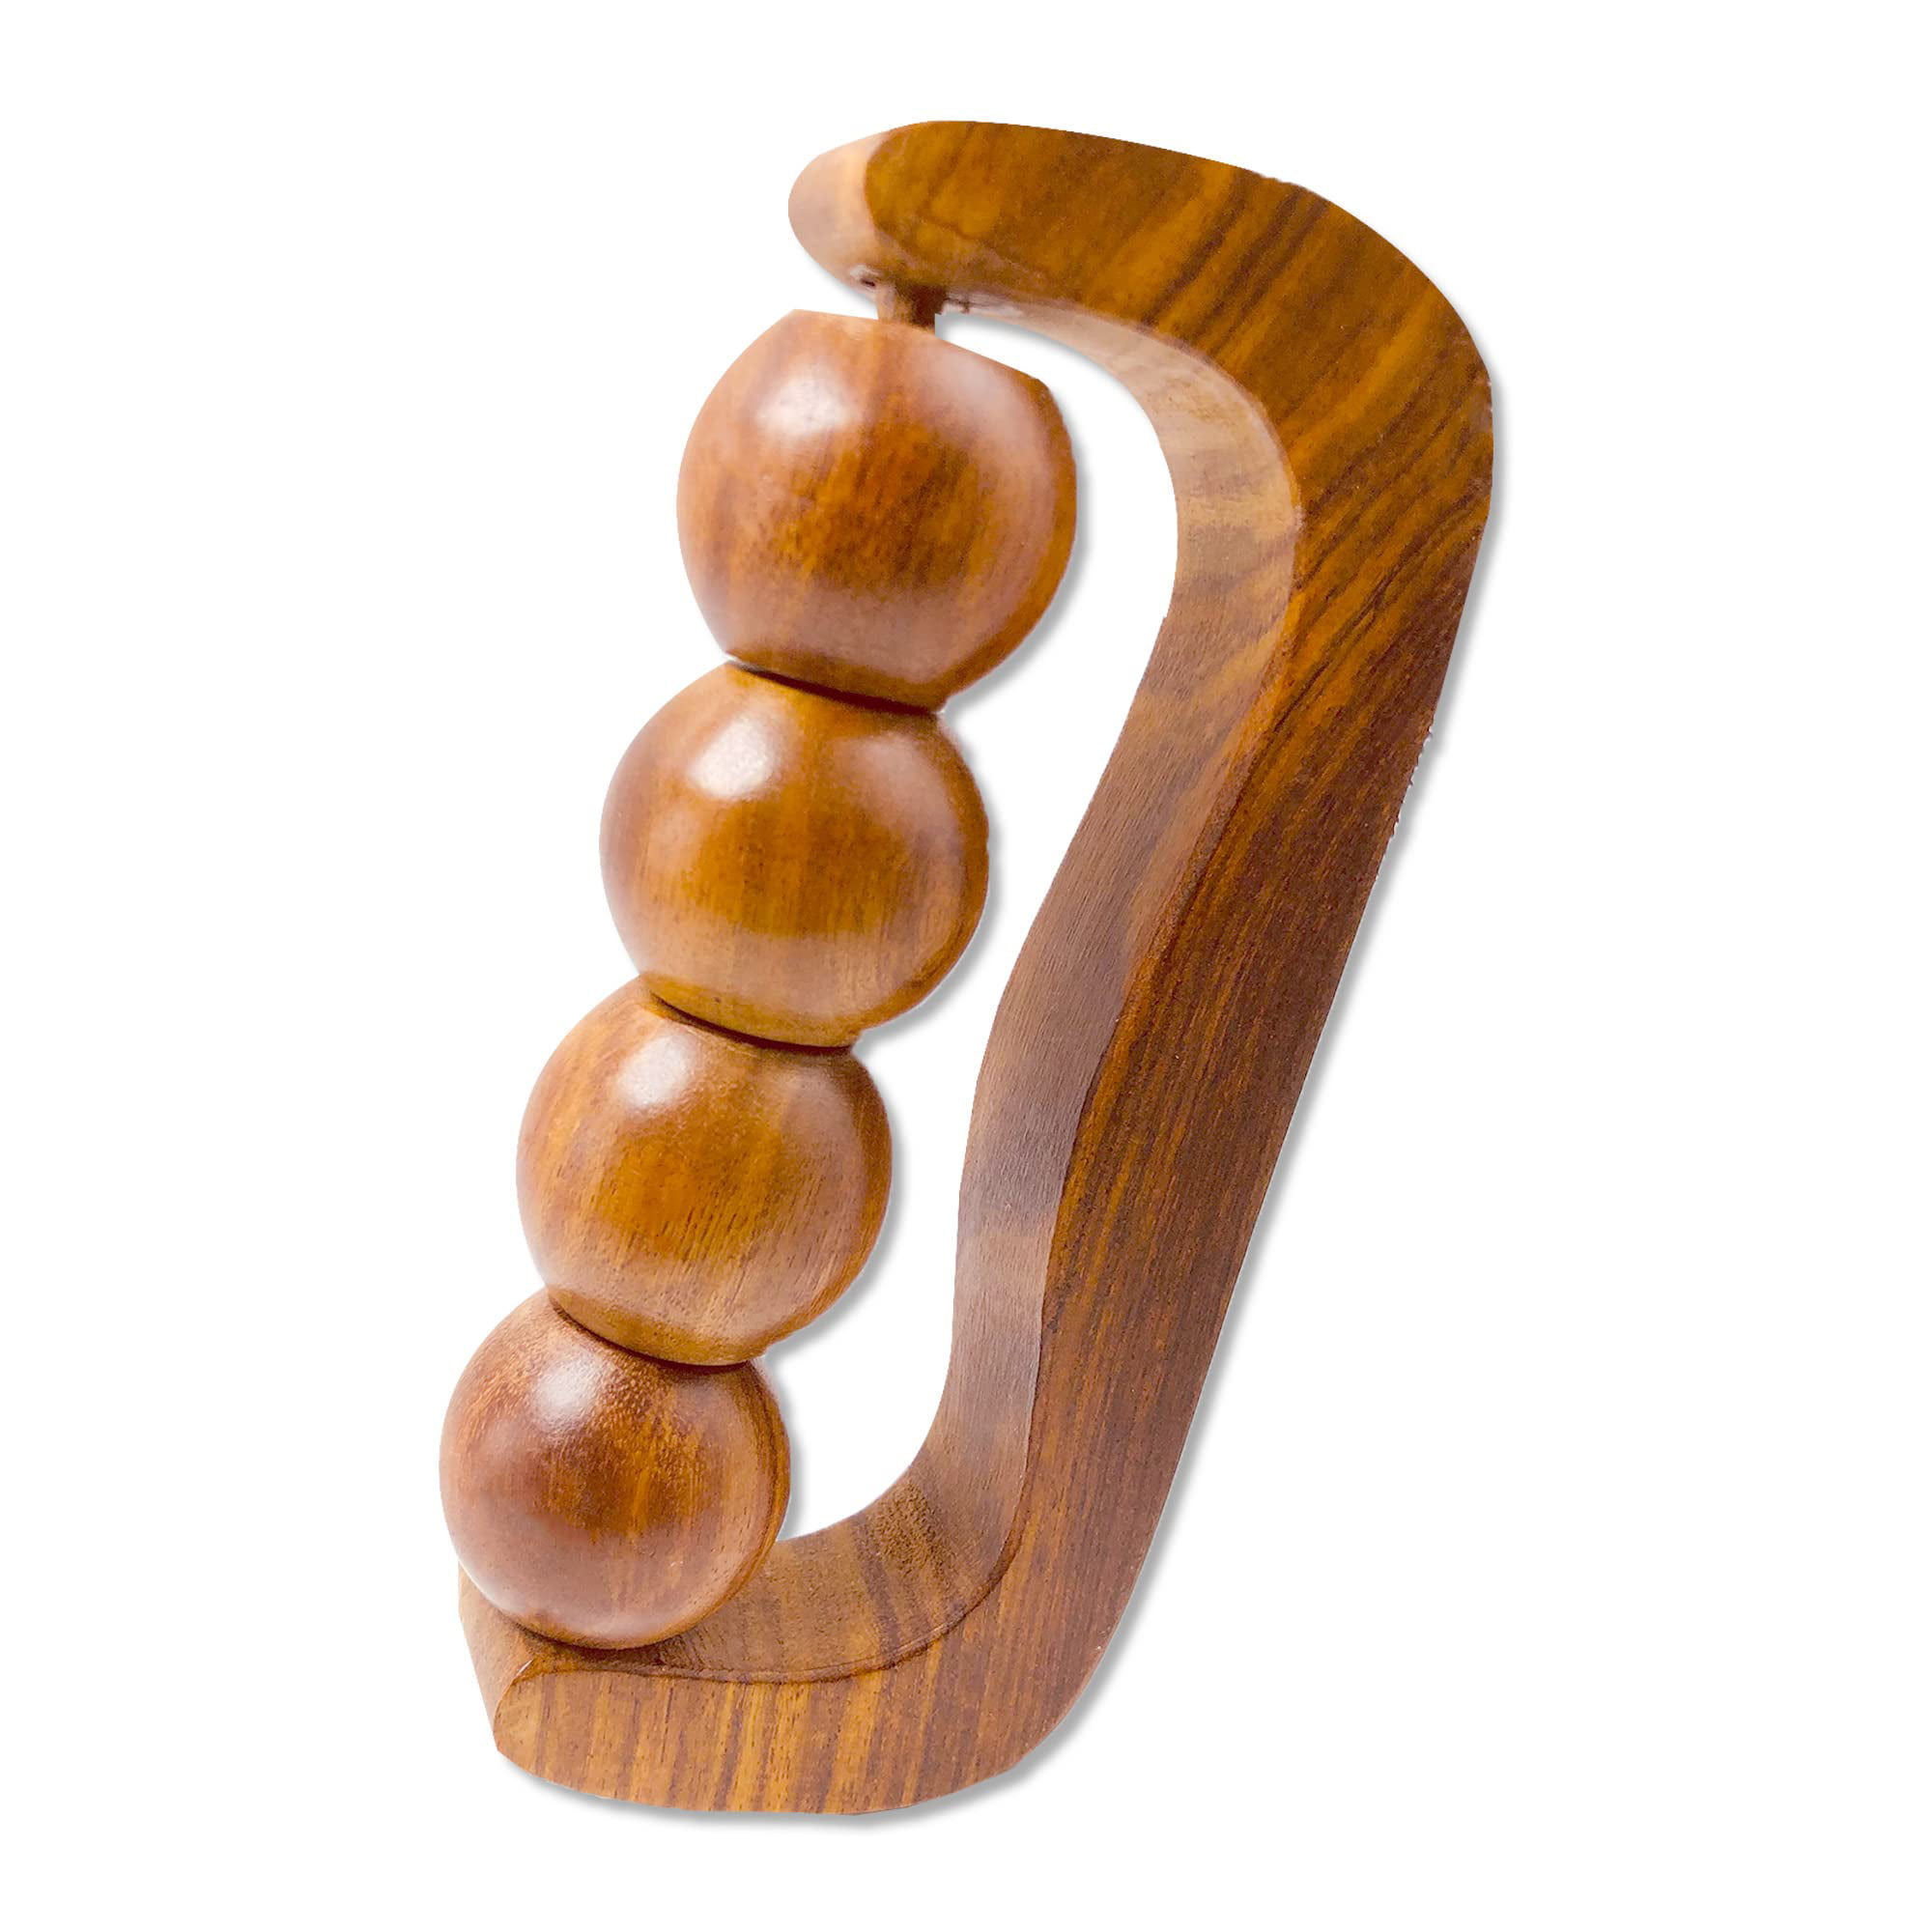 Hathkaam Wooden Massage Roller 7 Rosewood Handheld Unisex Body Massager Tool 4 Wheel Mouse For